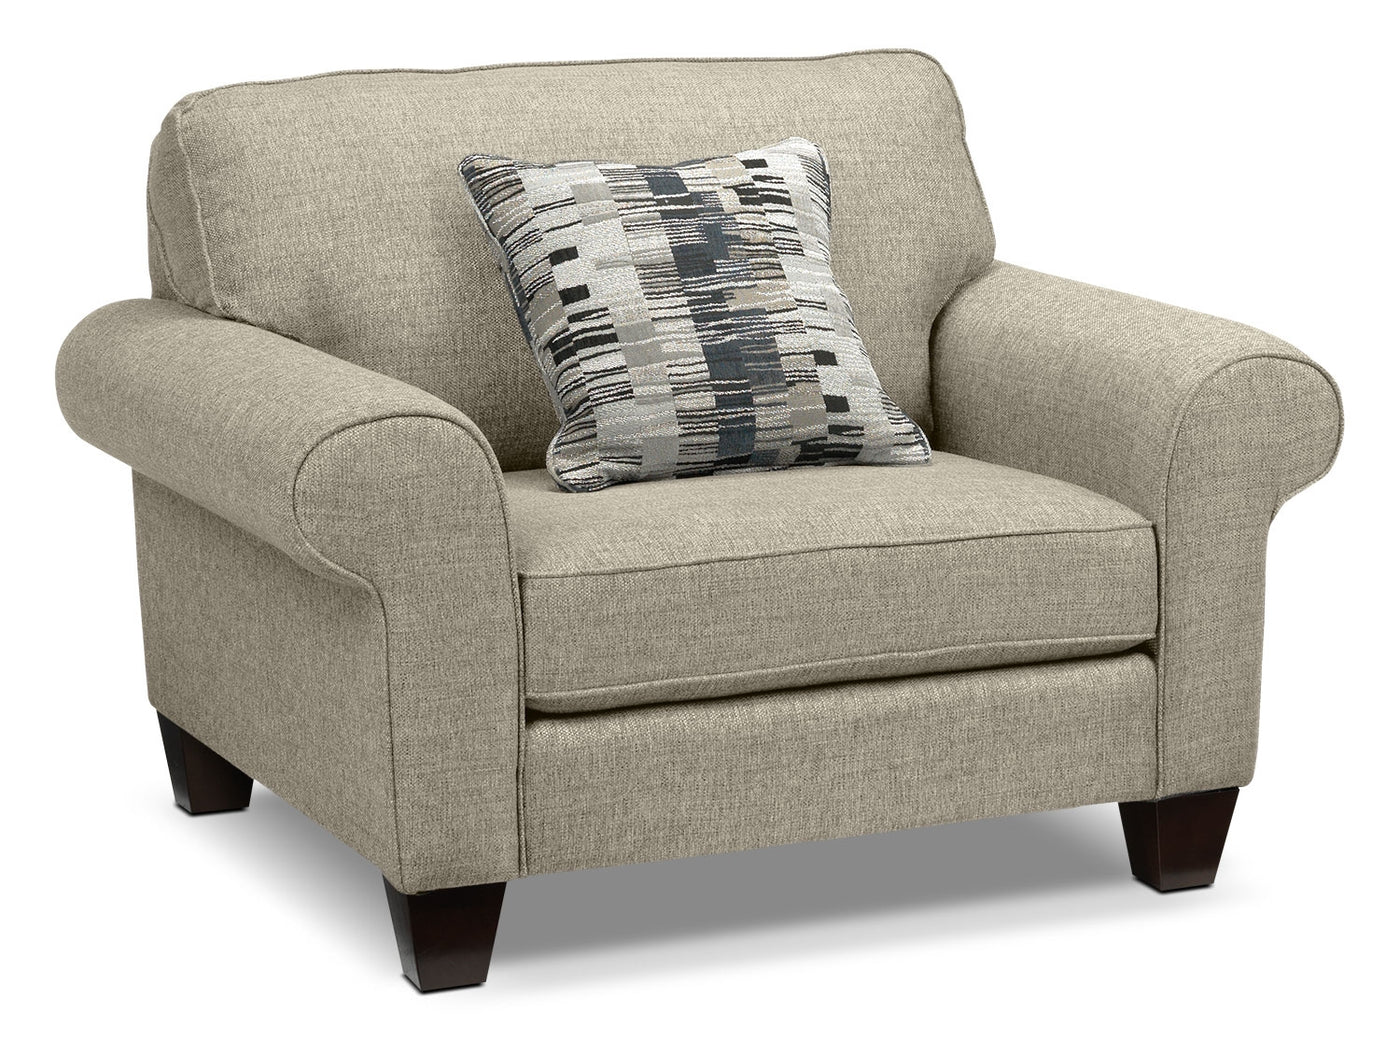 Drake Sofa, Loveseat and Chair Set - Taupe